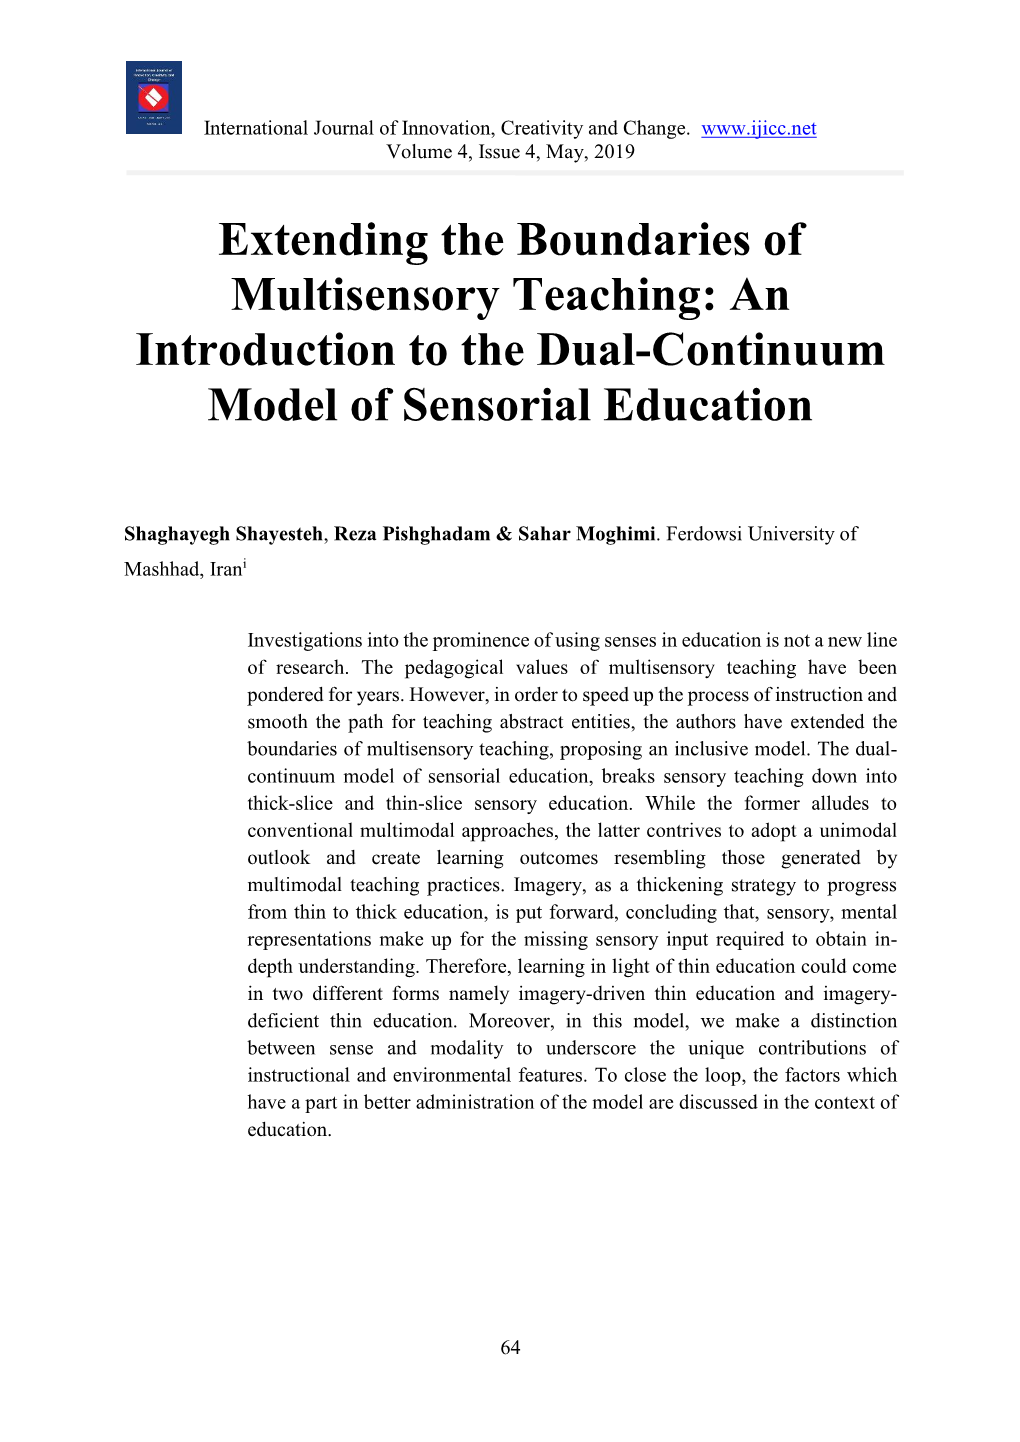 Extending the Boundaries of Multisensory Teaching: an Introduction to the Dual-Continuum Model of Sensorial Education